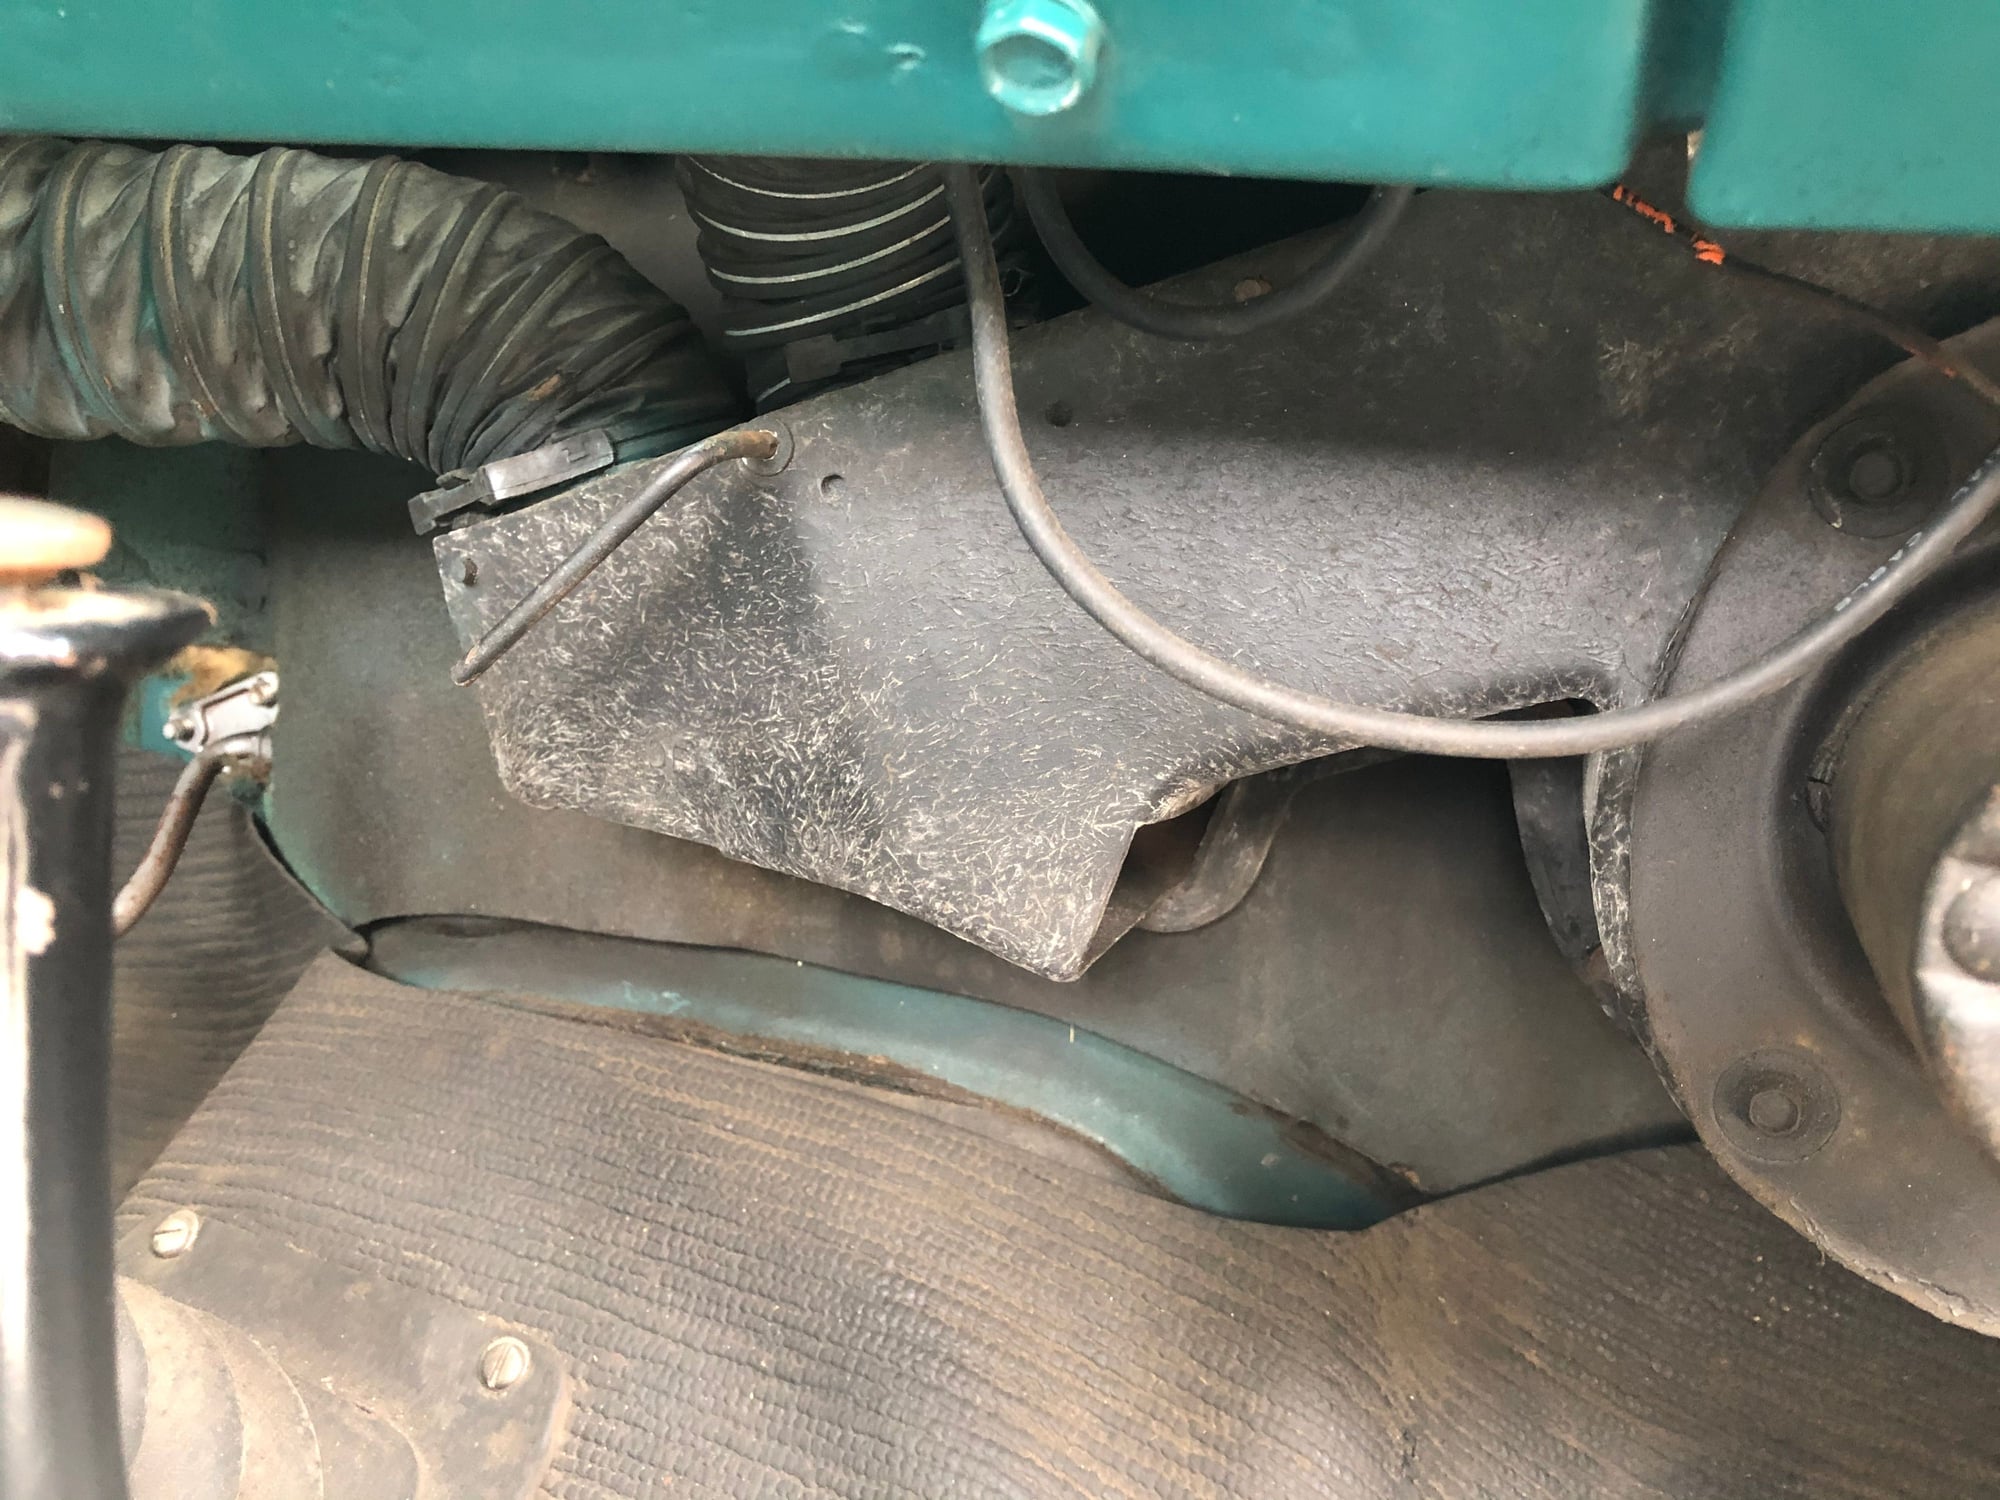 Heater Questions - Ford Truck Enthusiasts Forums 6.7 Cummins Heater Blowing Cold Air